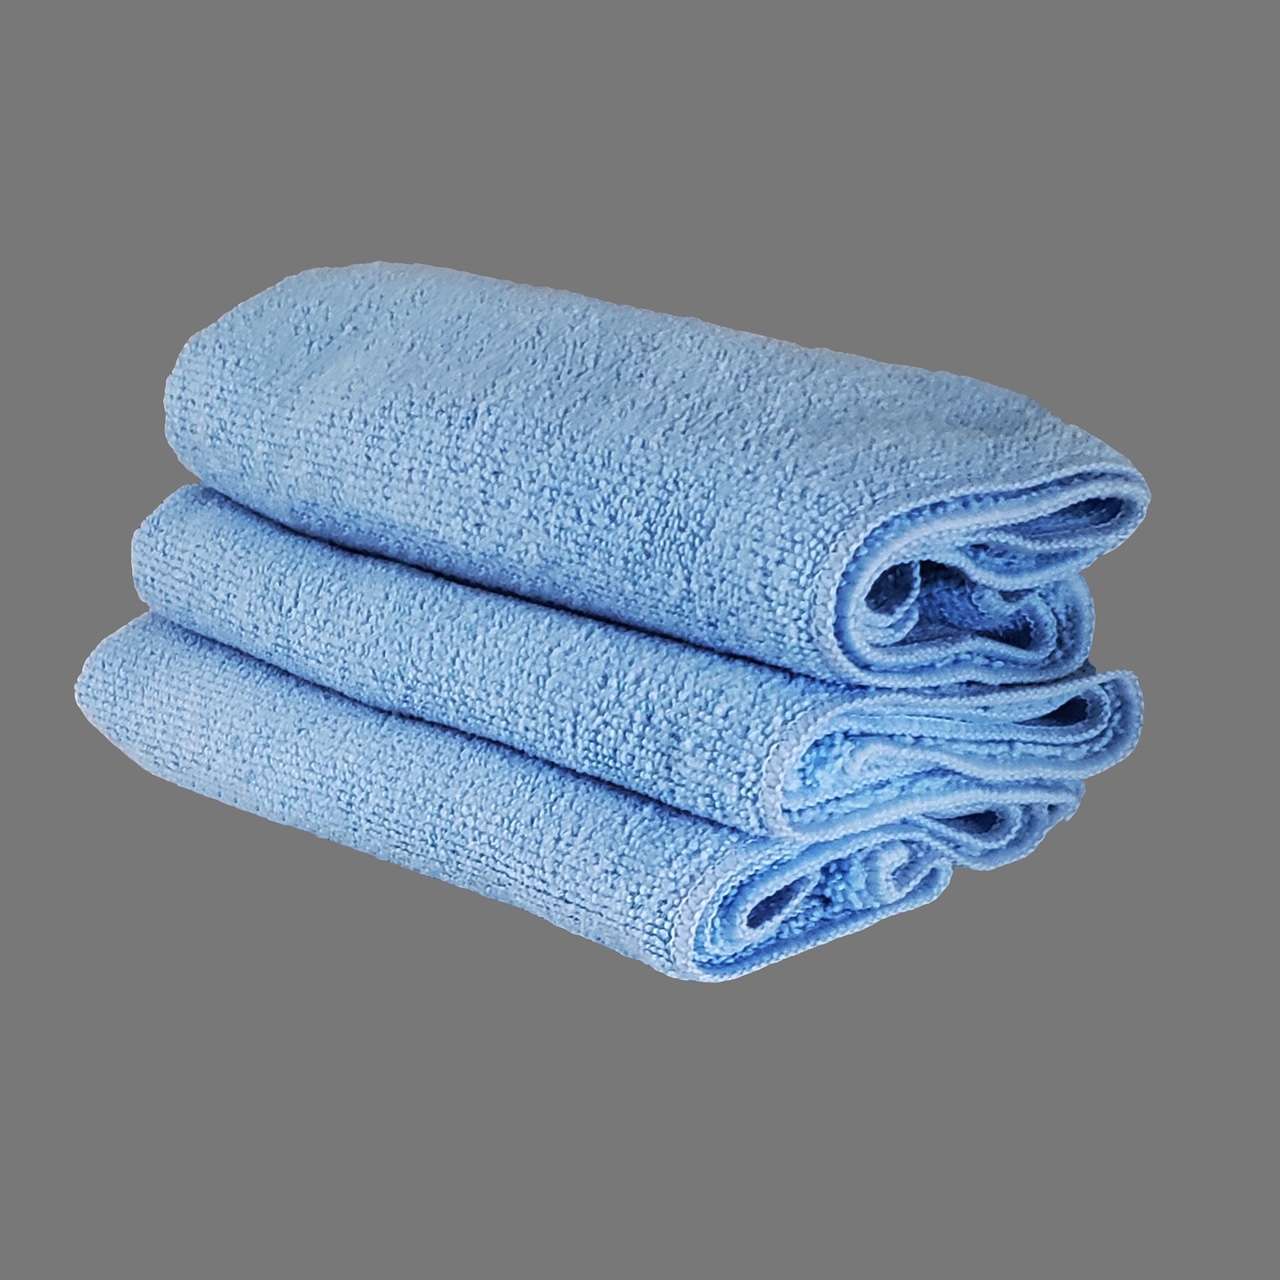 PREMIUM WEIGHT MICROFIBER ALL-PURPOSE CLOTH – The Janitors Supply